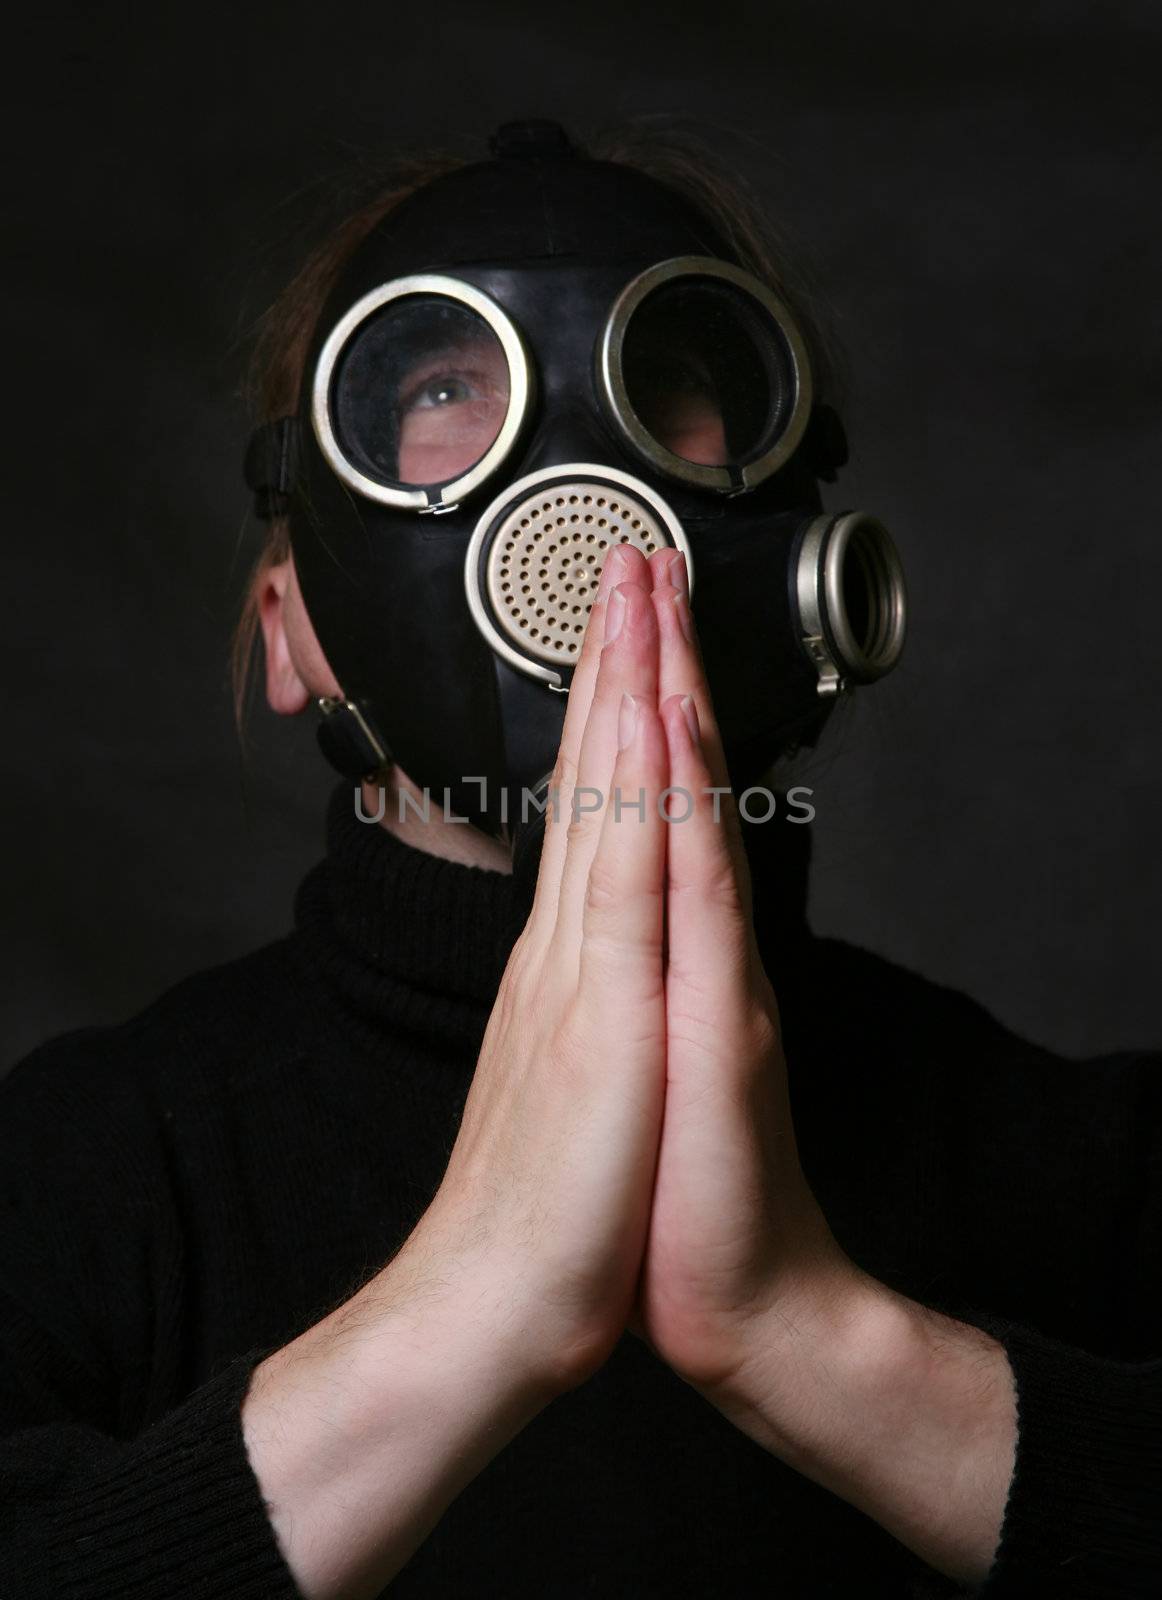 The man in a gas mask on a dark background. Hands are combined as at prayer